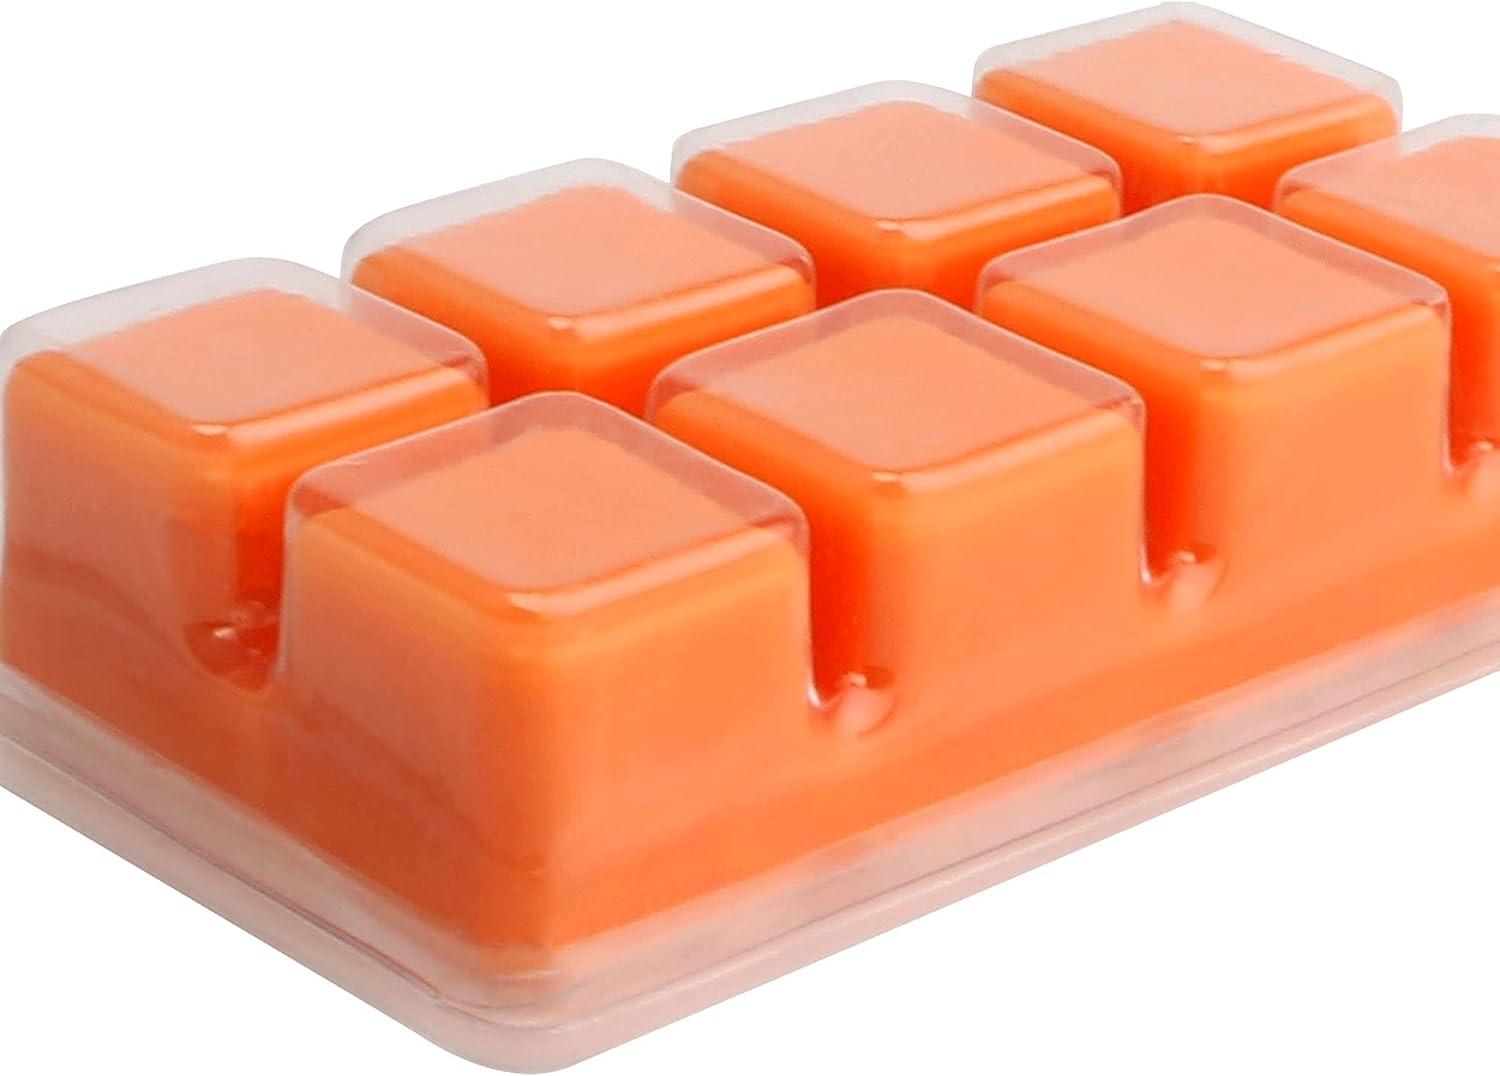 Wax Melts Containers, Plastic Melt Clamshell Molds Manufacturer